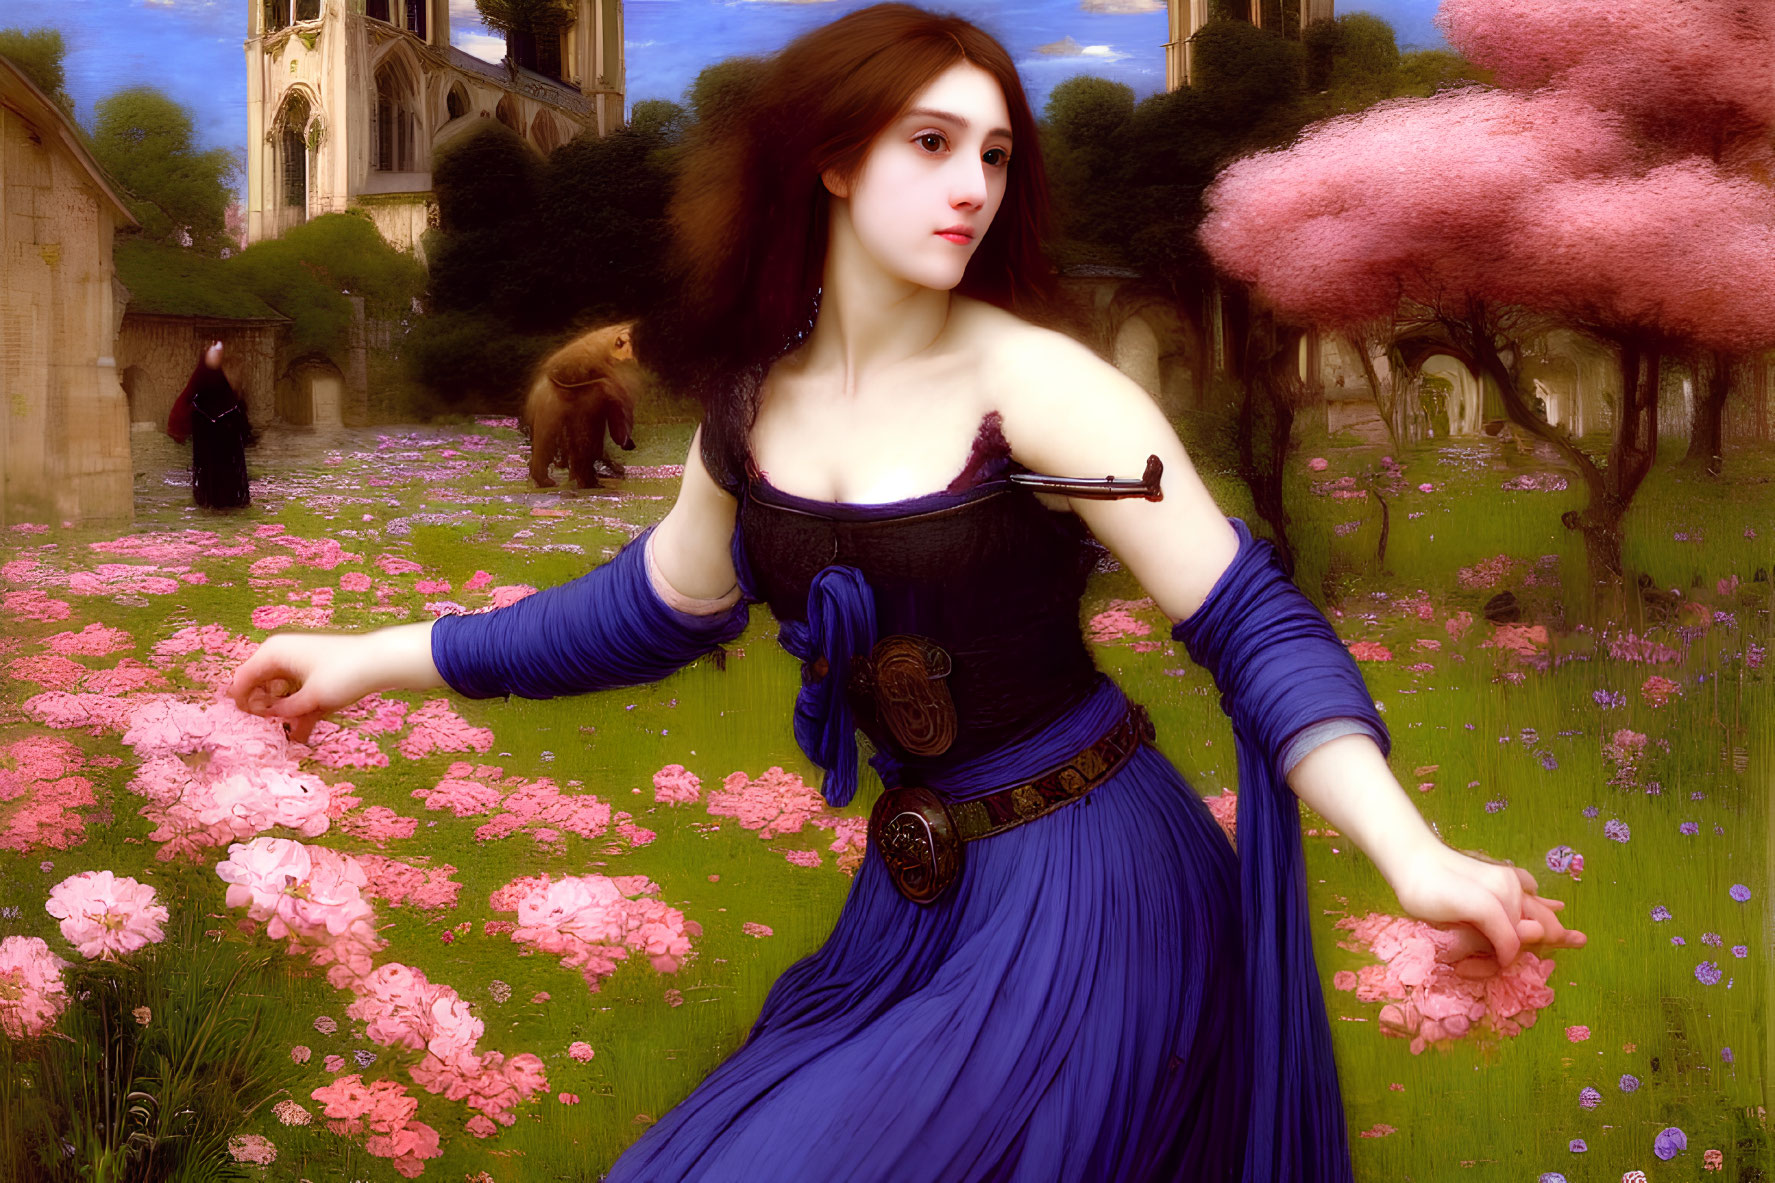 Woman in Blue Dress Surrounded by Flowers and Cathedral Background